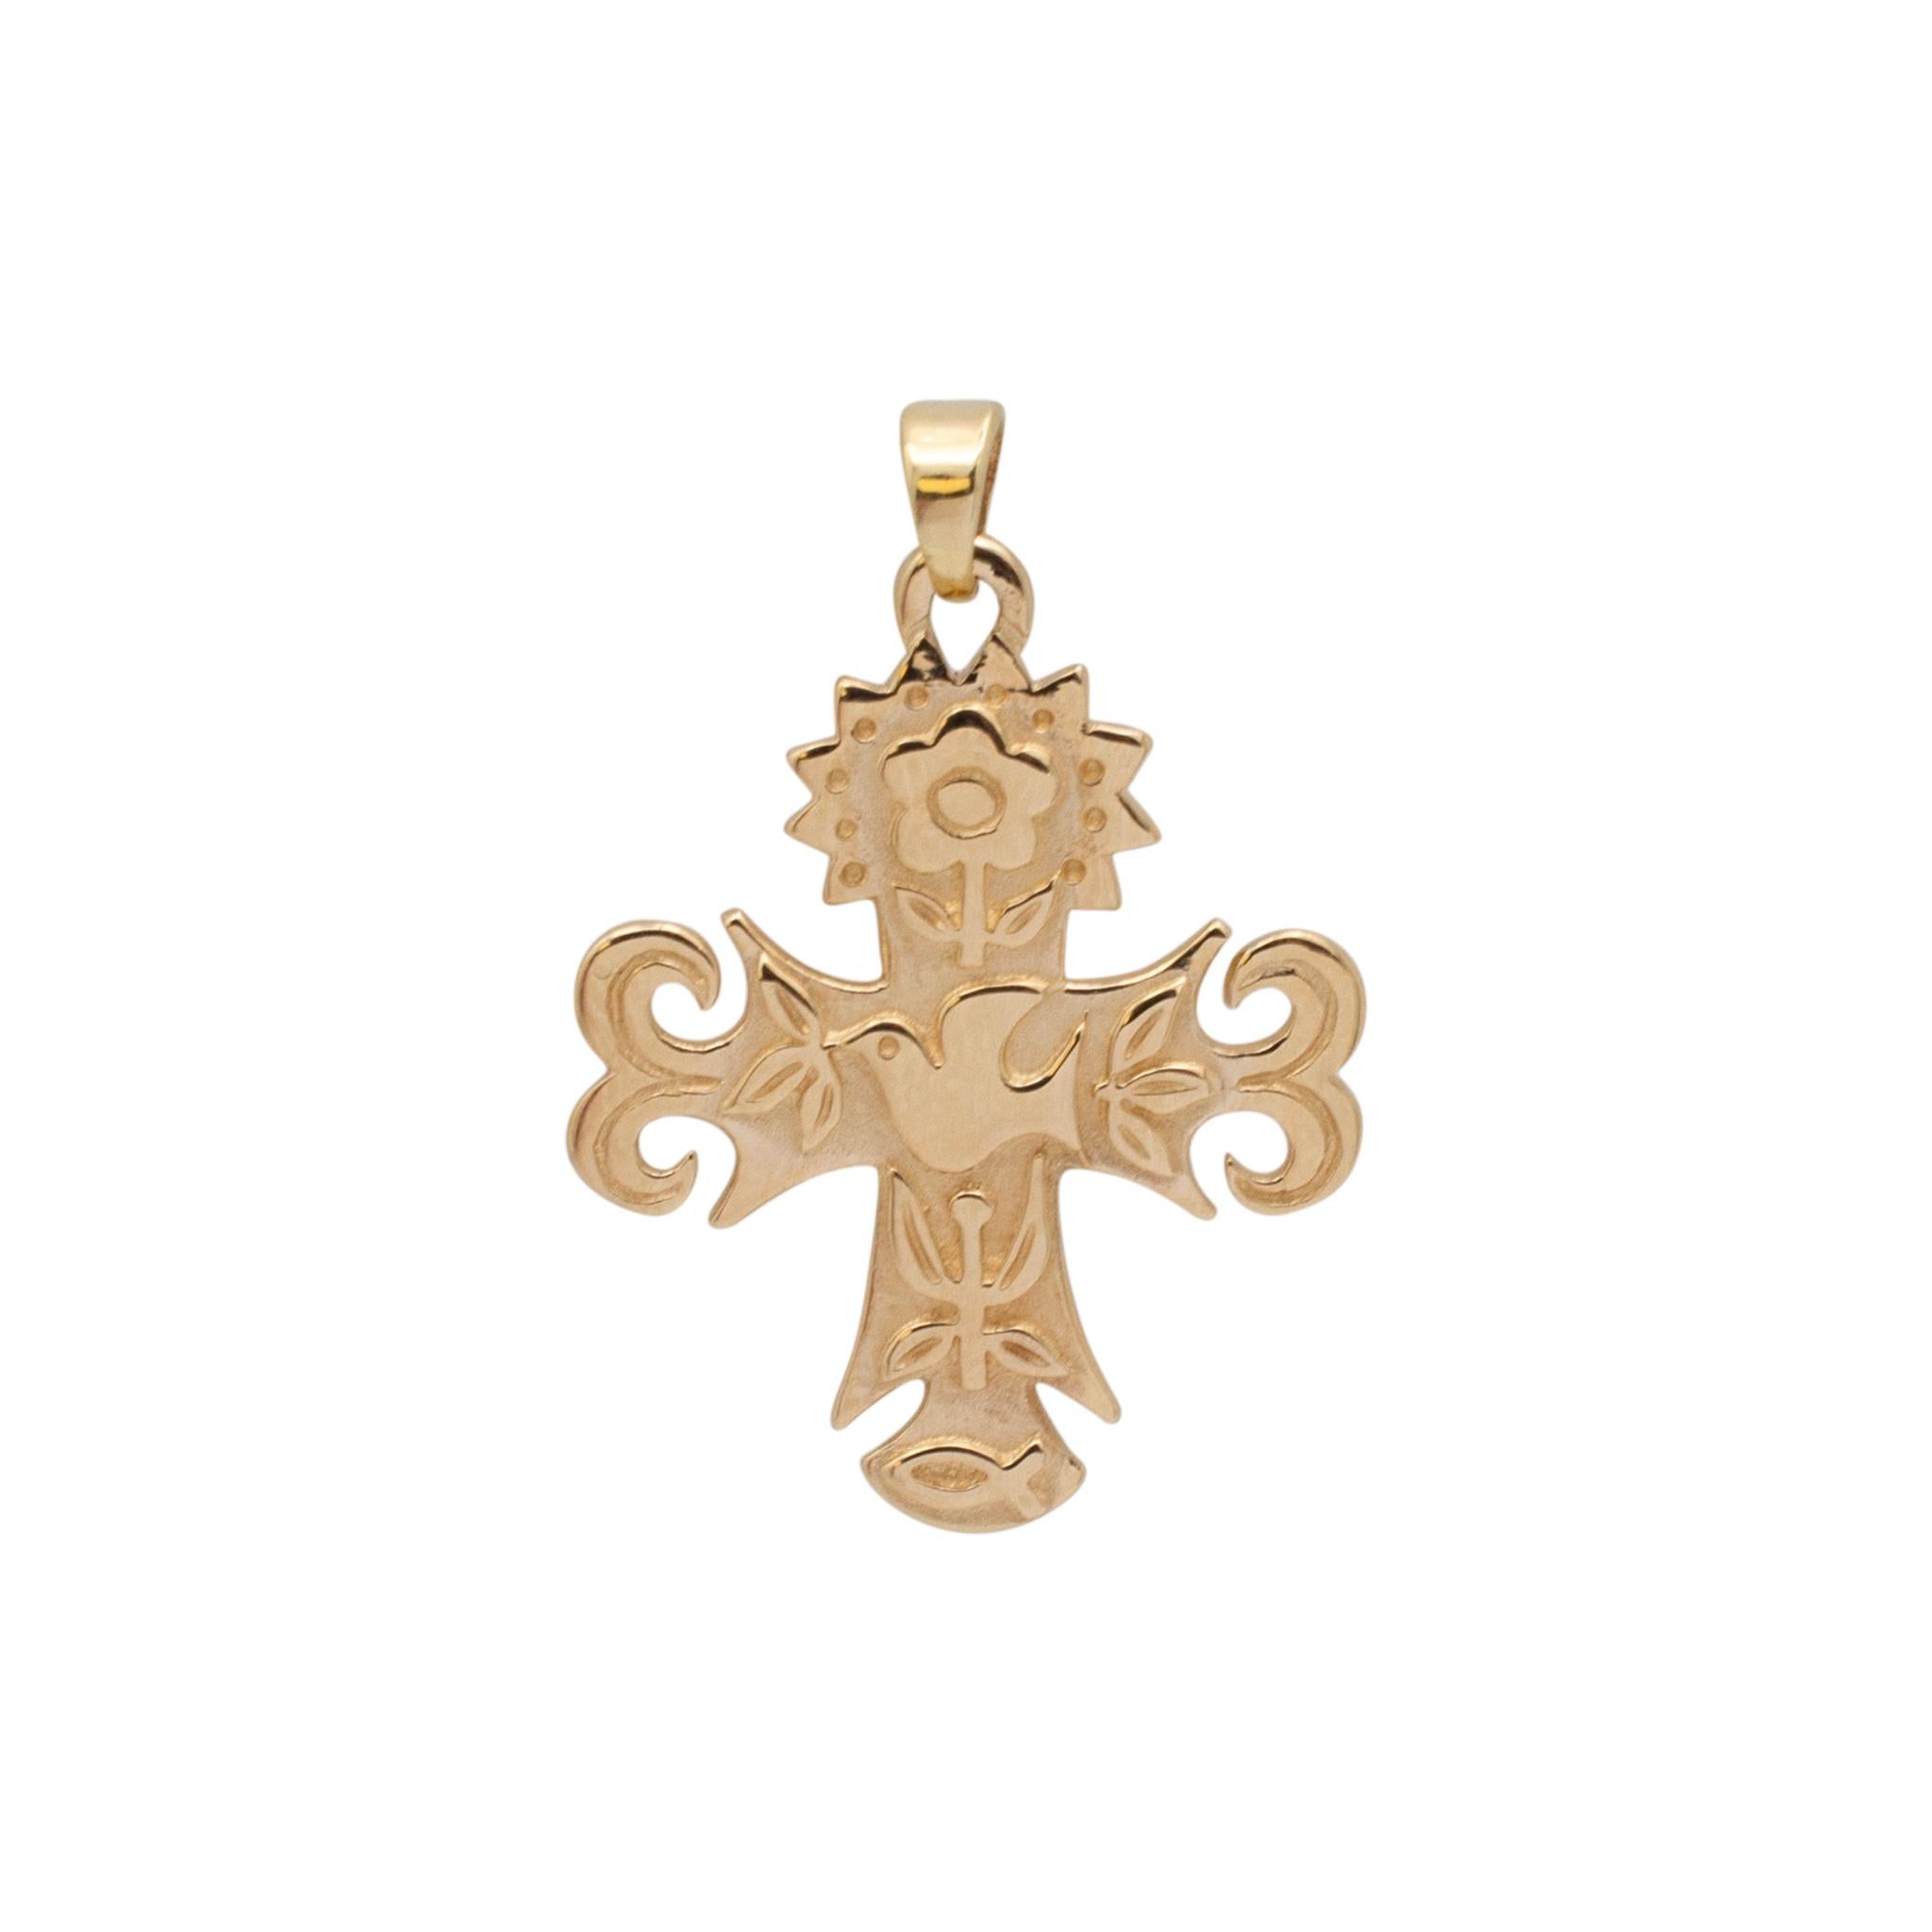 Brand: James Avery 

Metal Type: 14K Yellow Gold

Length: 1.00 inches

Width: 22.90 mm

Weight: 4.30 grams

Designer made textured & polished 14K yellow gold religious, symbol, cross pendant. Engraved with 